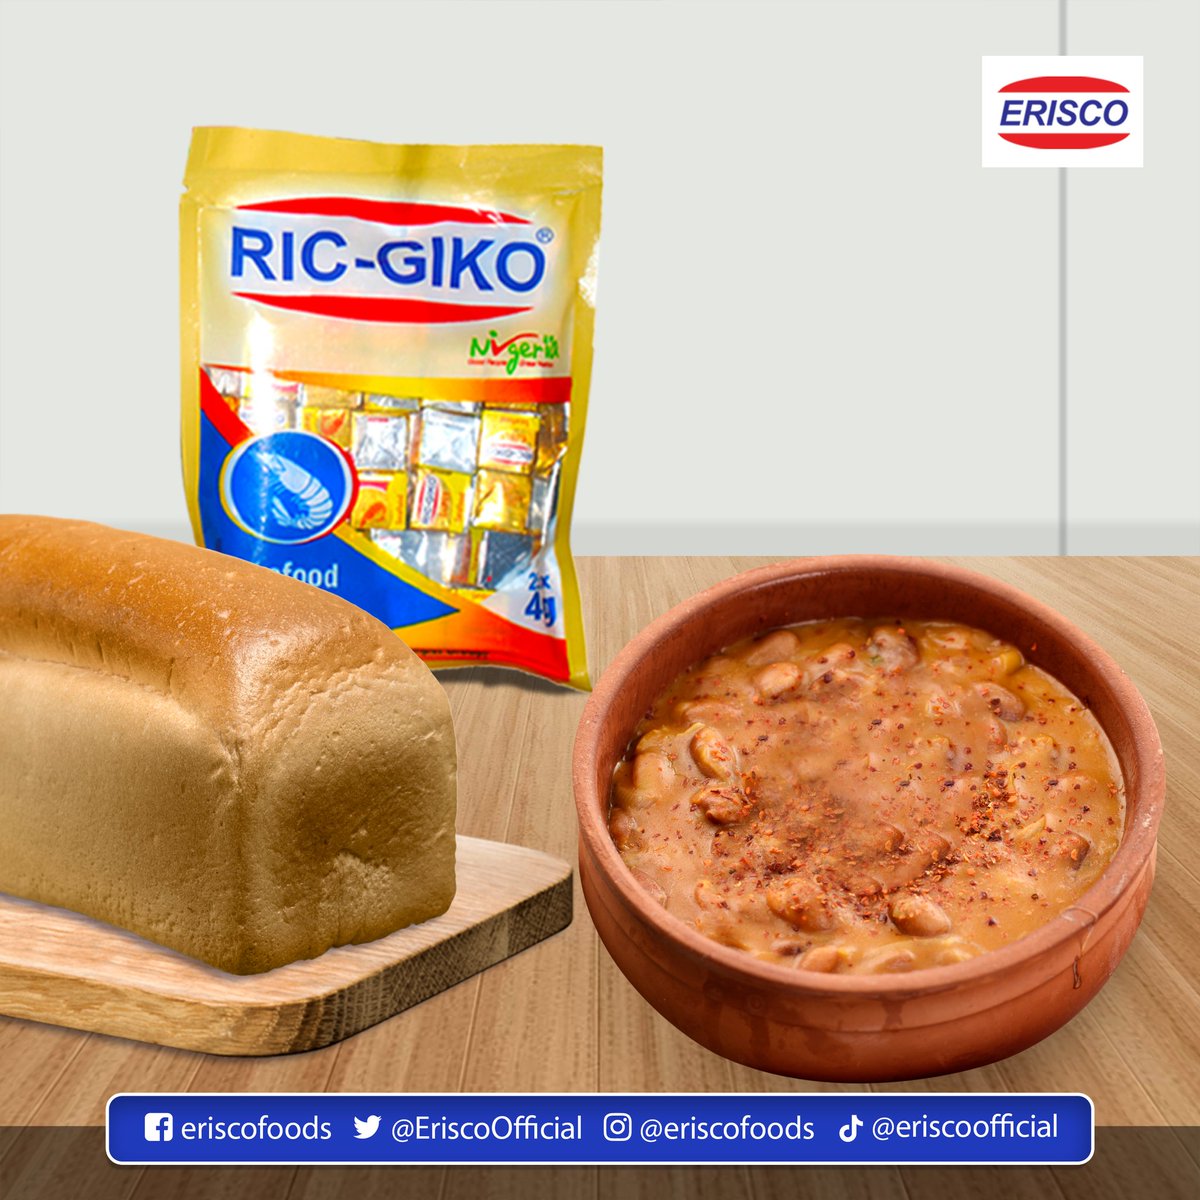 Join us for a classic breakfast of bread and beans made with RIC-GIKO Seafood Seasoning - Your number 1 Taste Maker.

#EriscoFoods #ricgiko #localcuisine